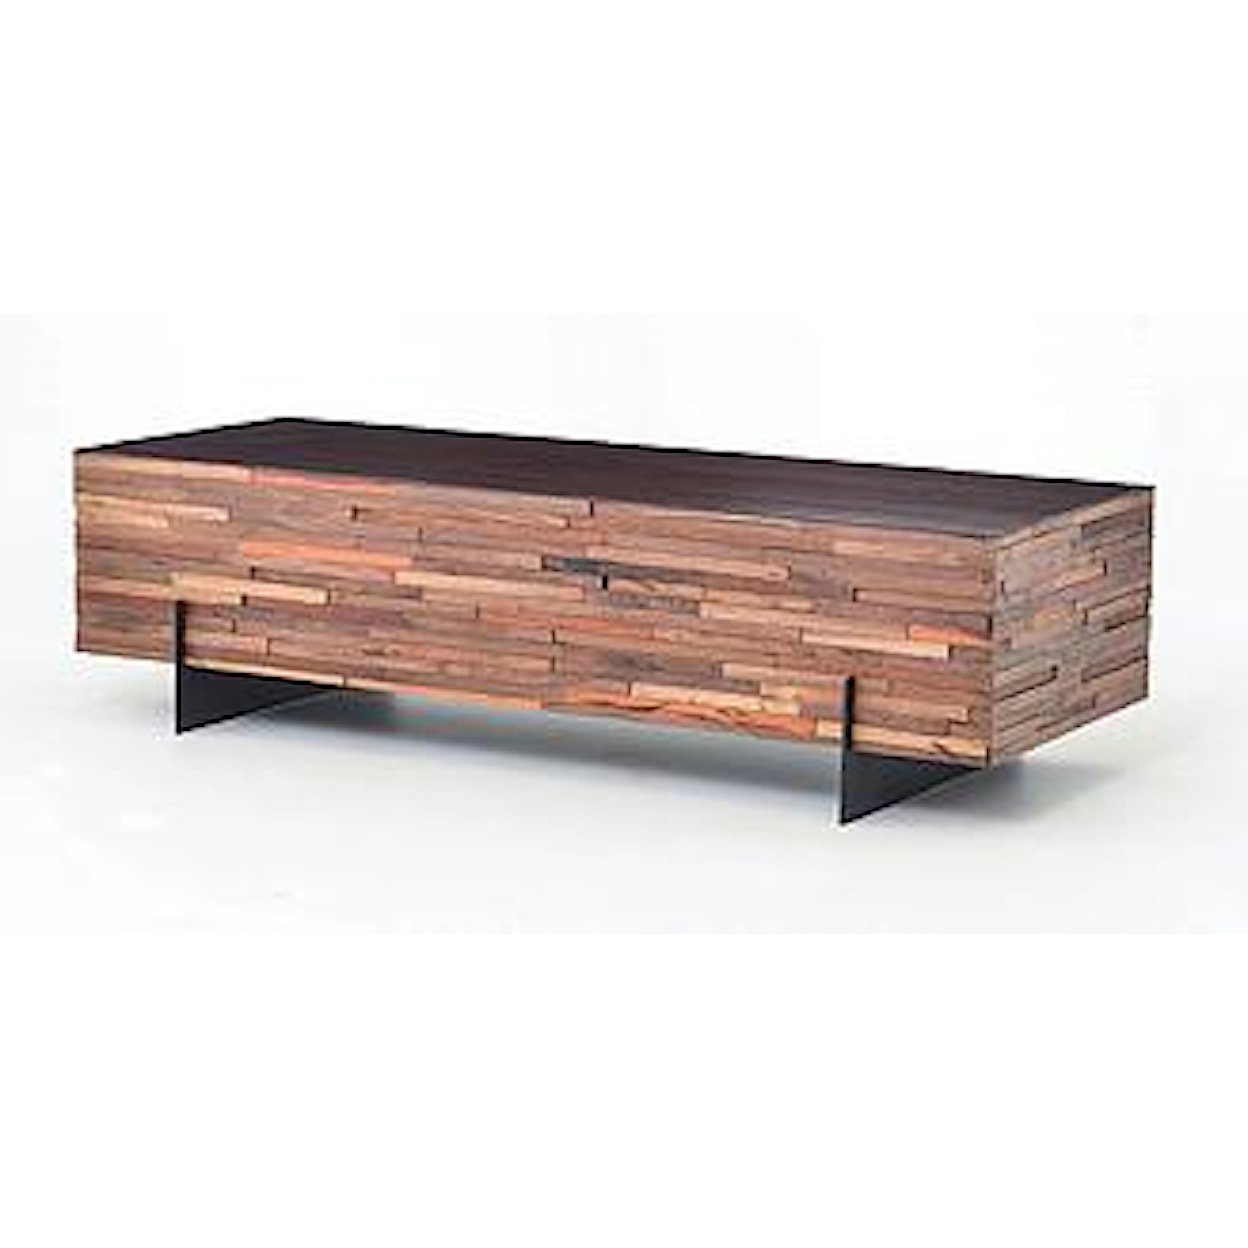 Four Hands Bina Re-Cycle Levi Coffee Table